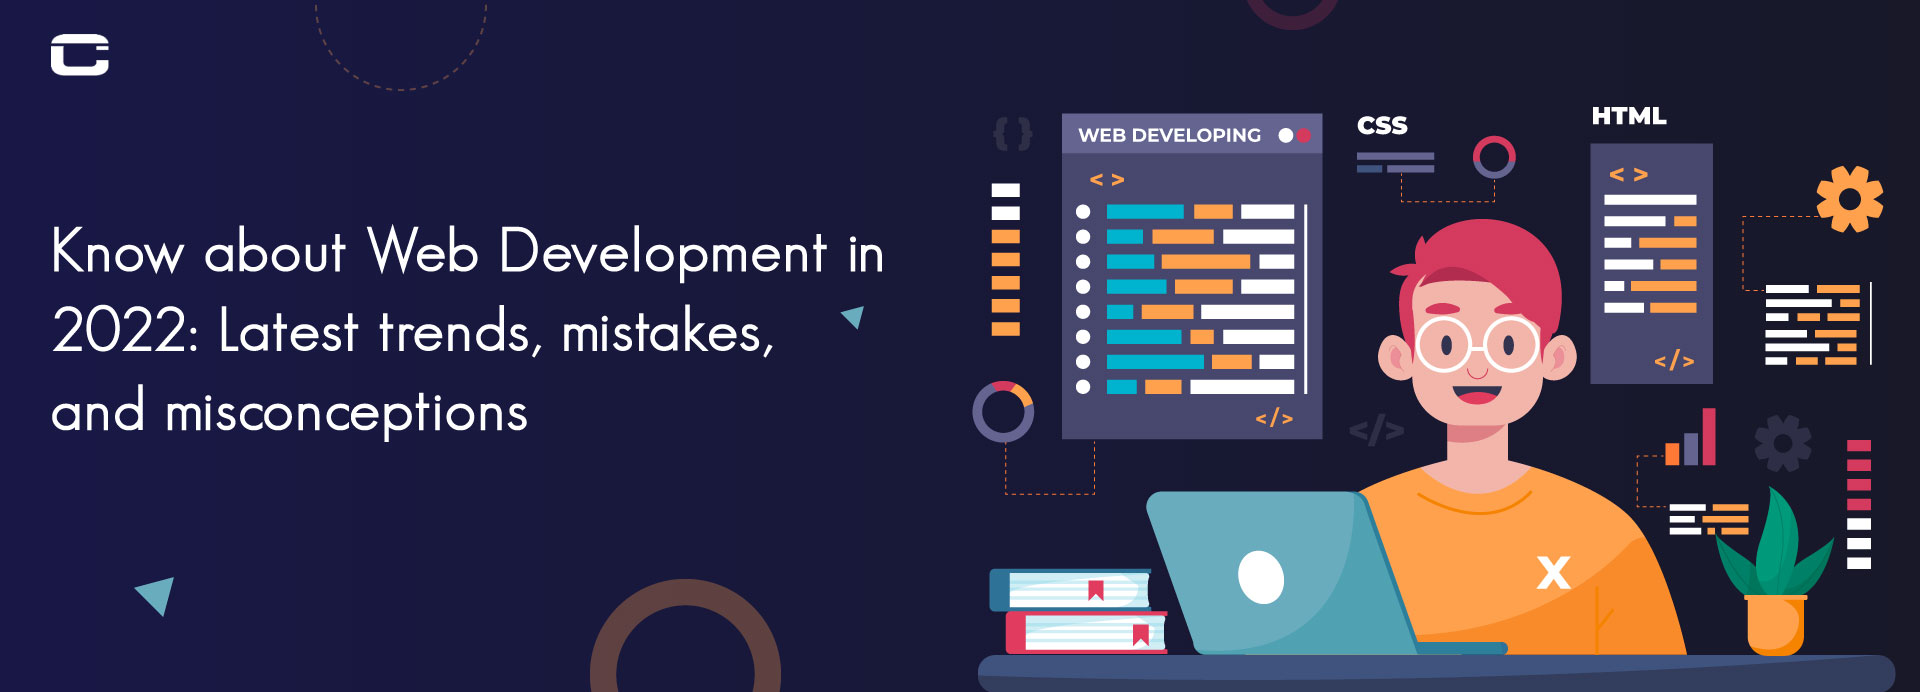 Know about Web Development in 2022: Latest trends, mistakes, and misconceptions